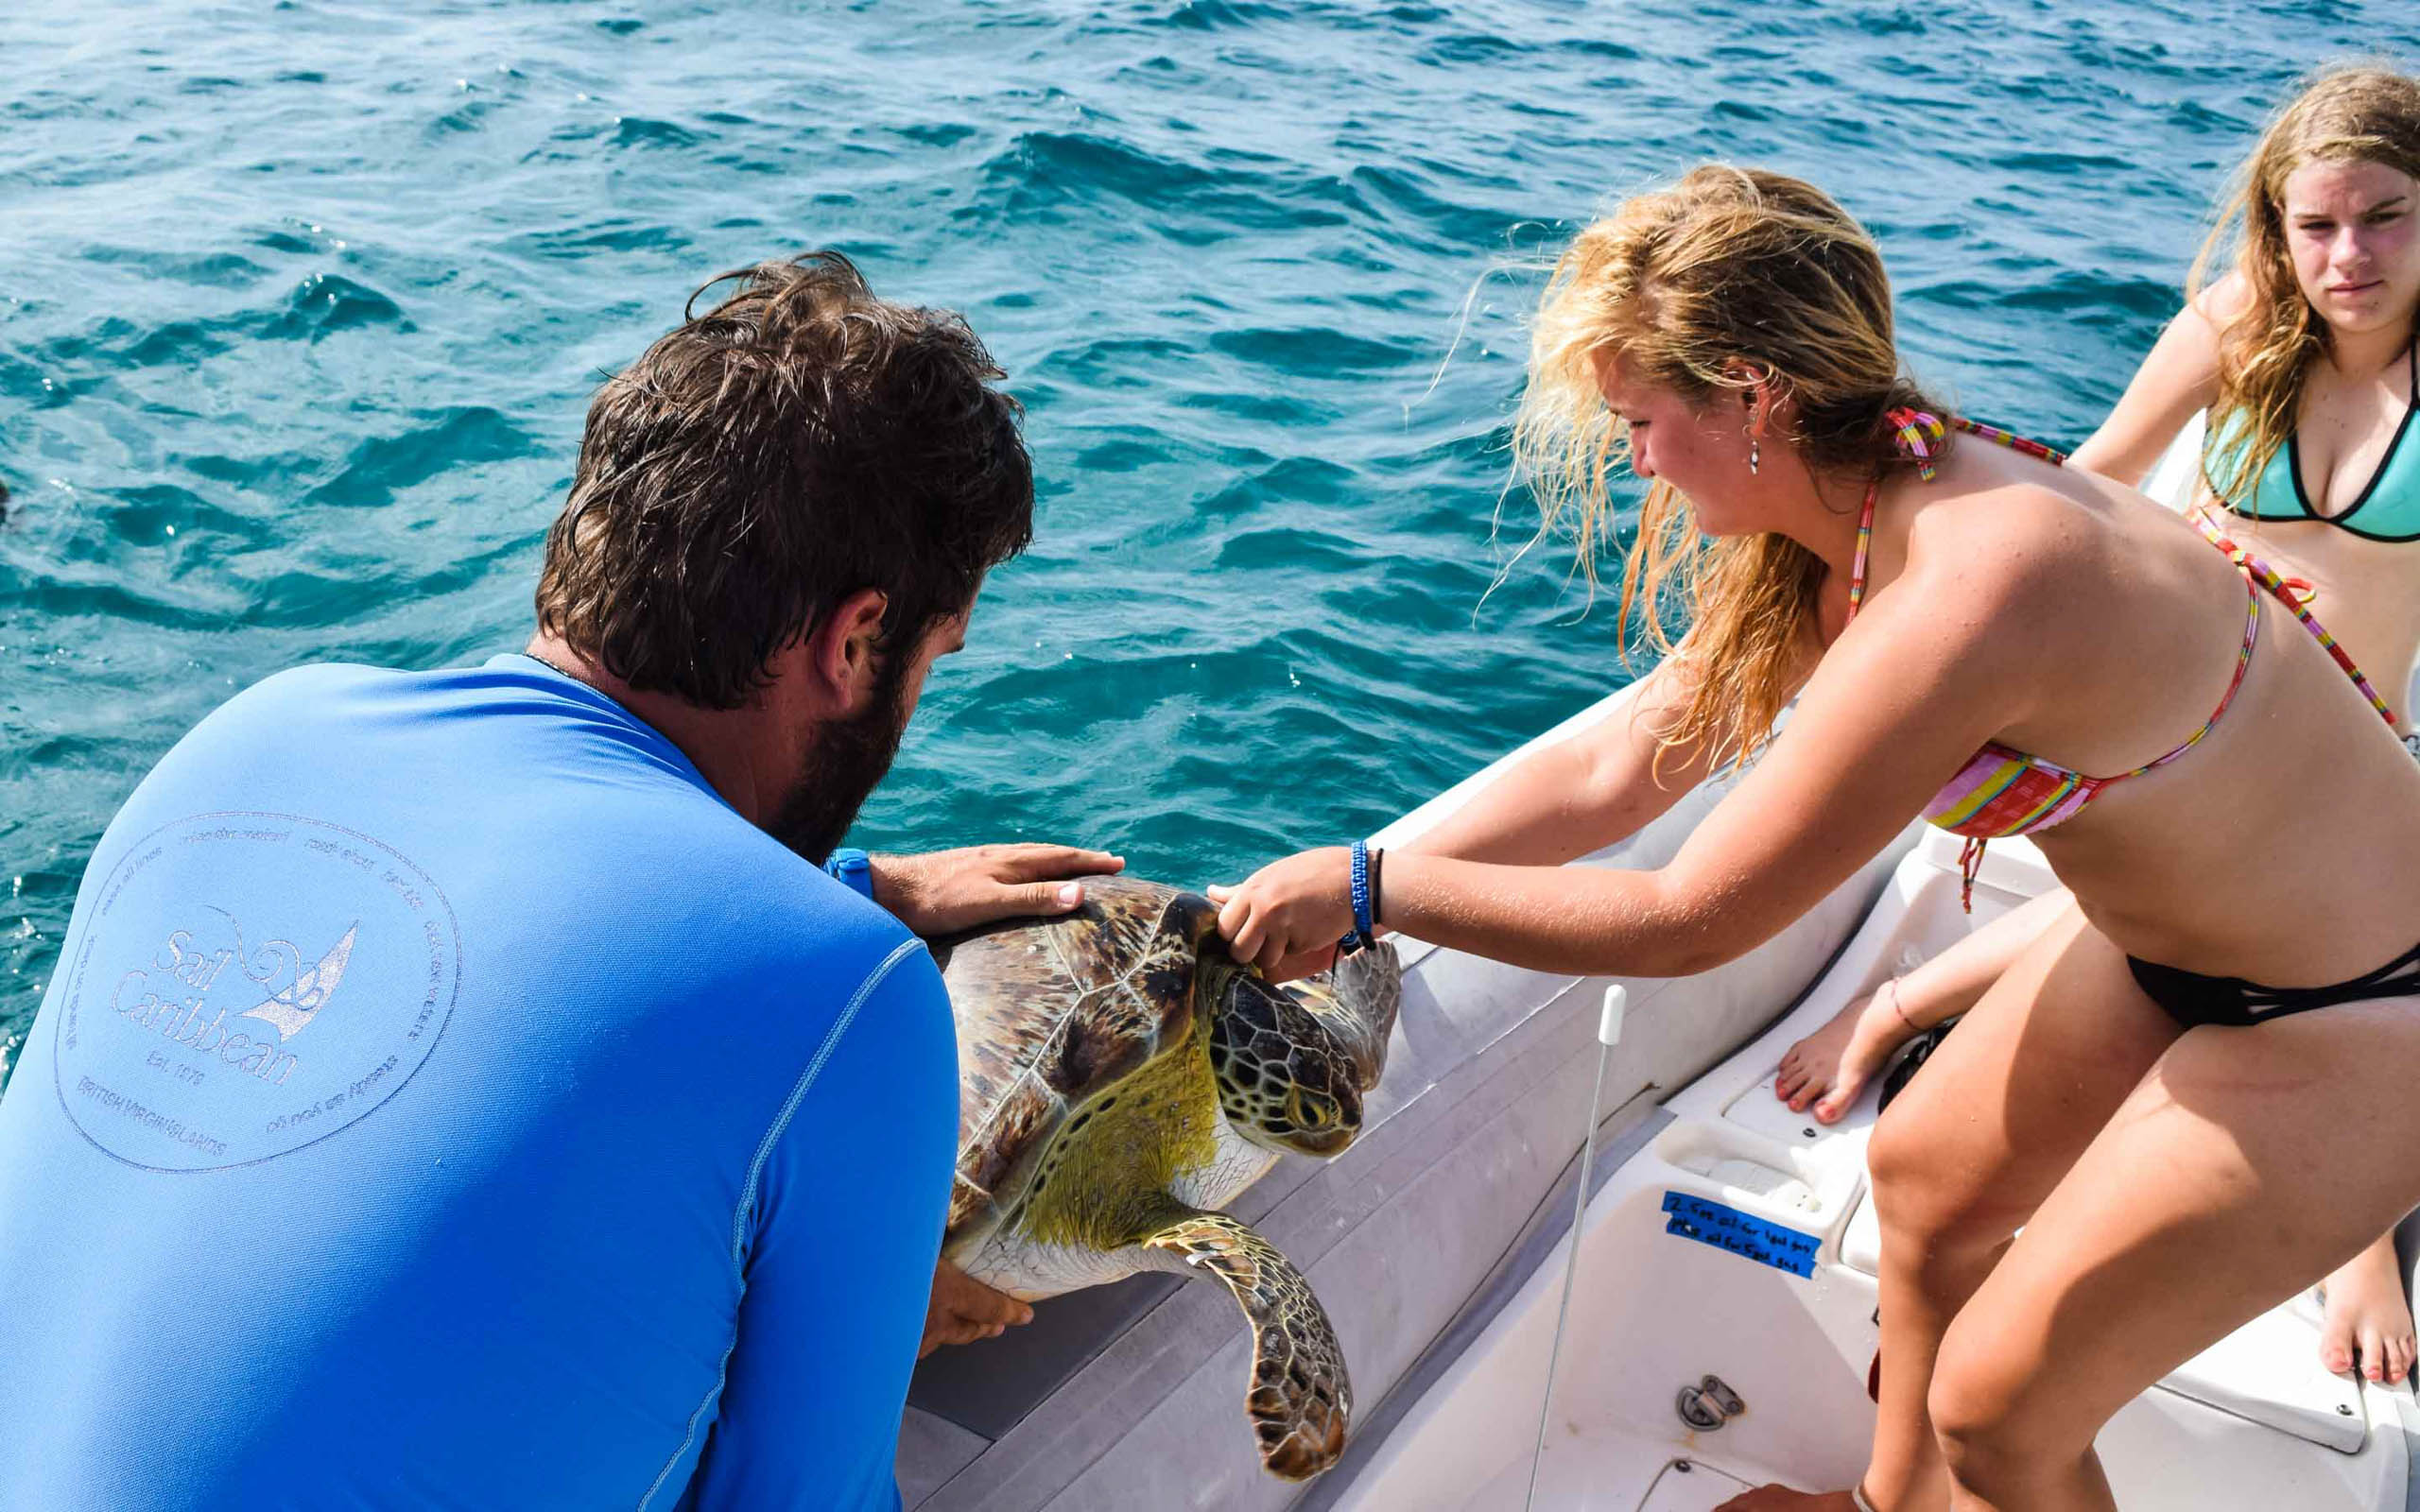 A group of people petting a turtle on a boat.